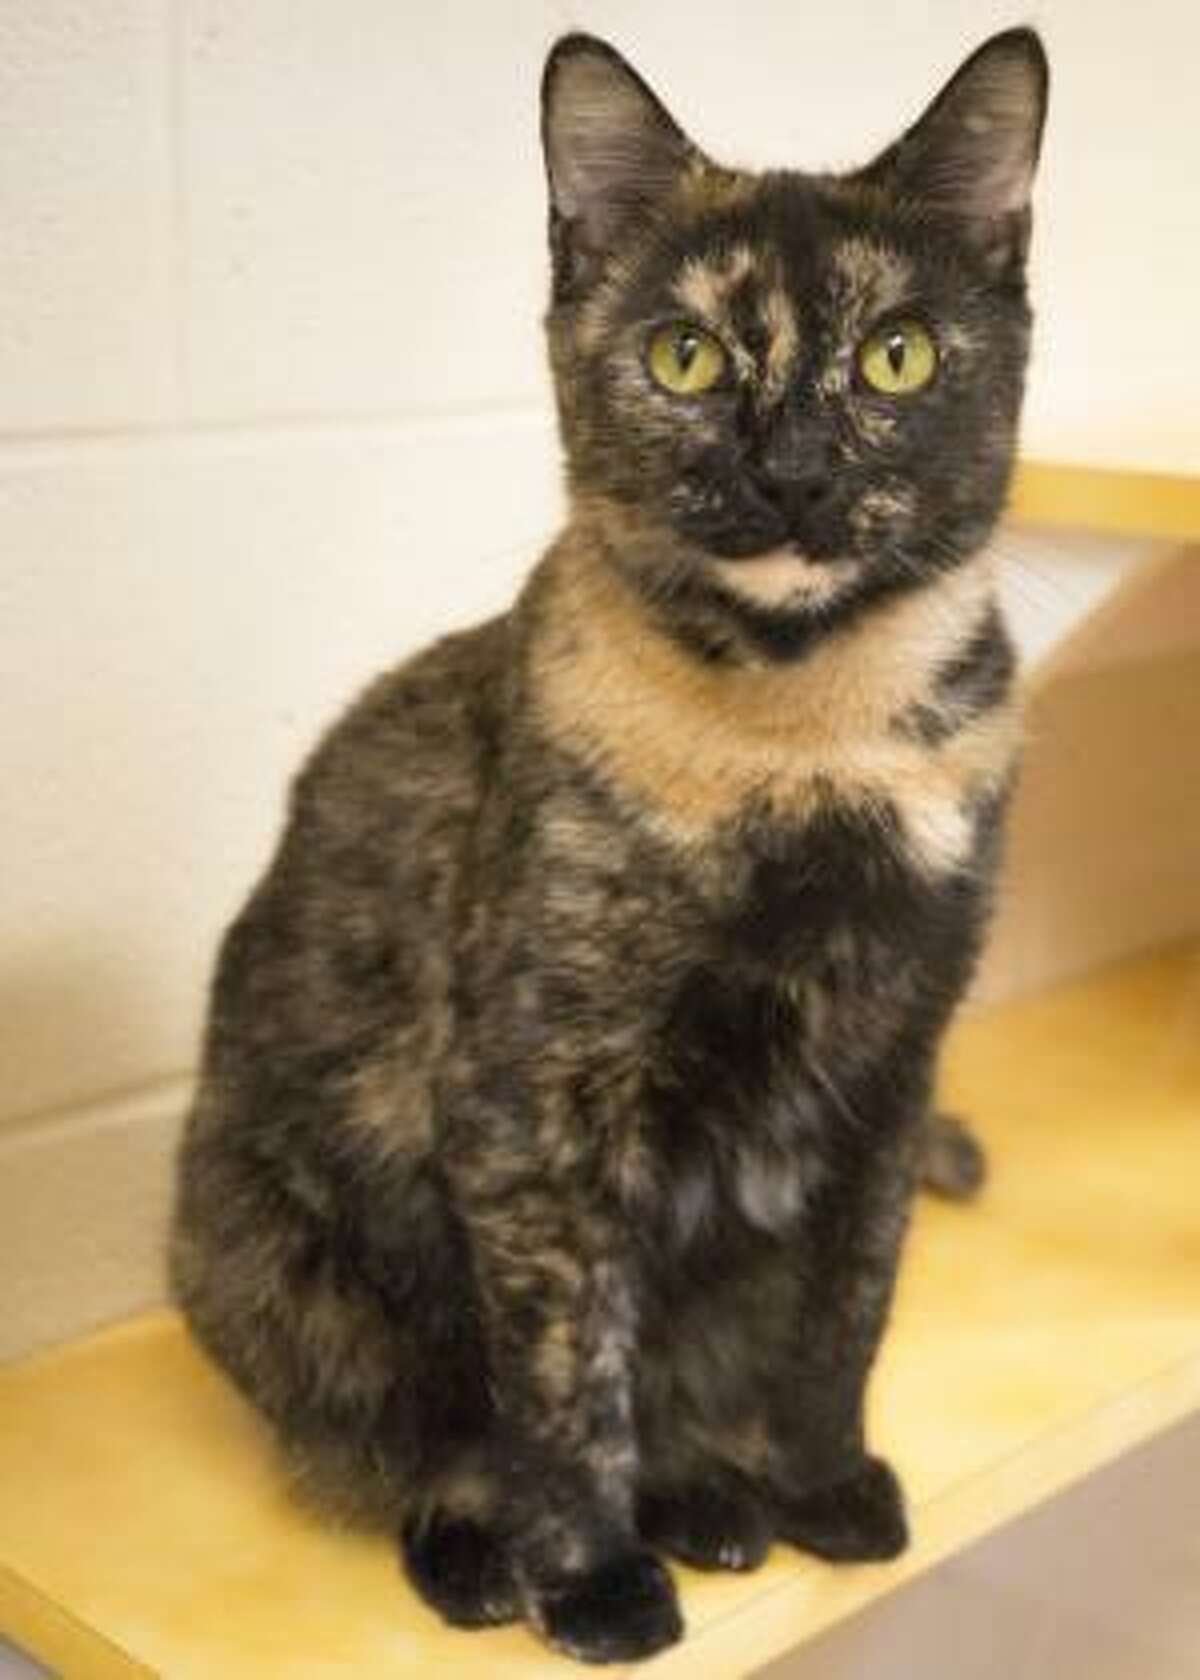 Prudence is waiting at the Connecticut Humane Society for a home of her own.